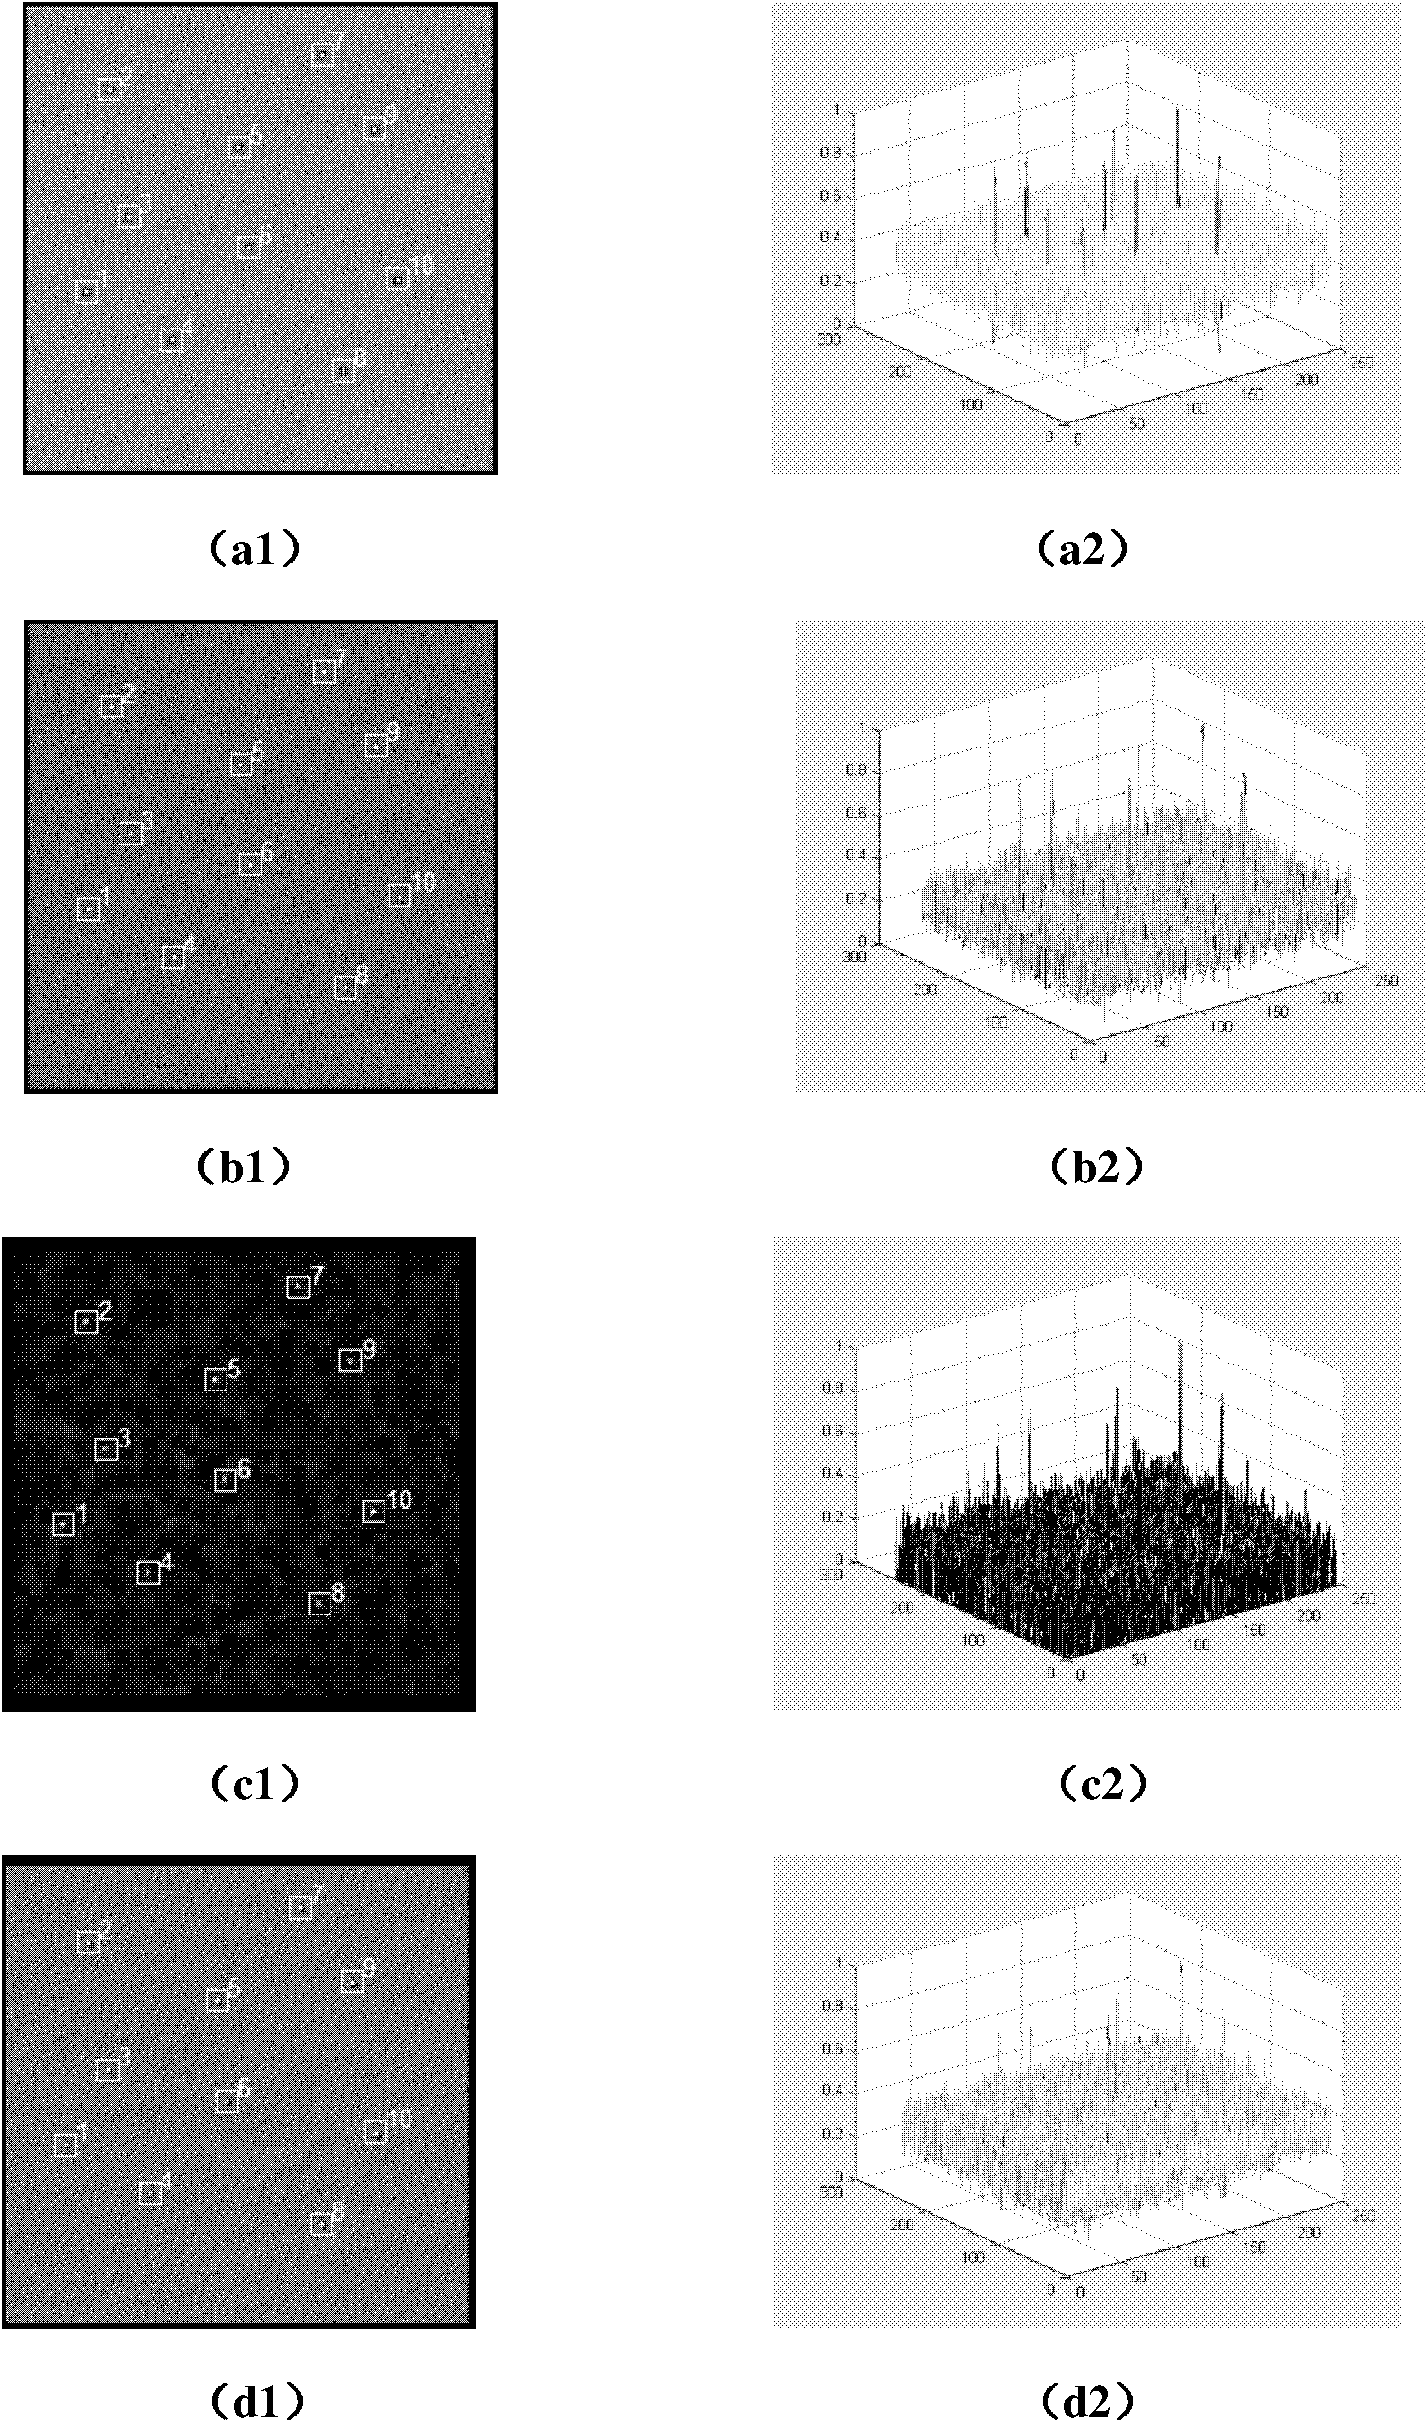 Infrared small target detection method based on overcomplete sparse representation